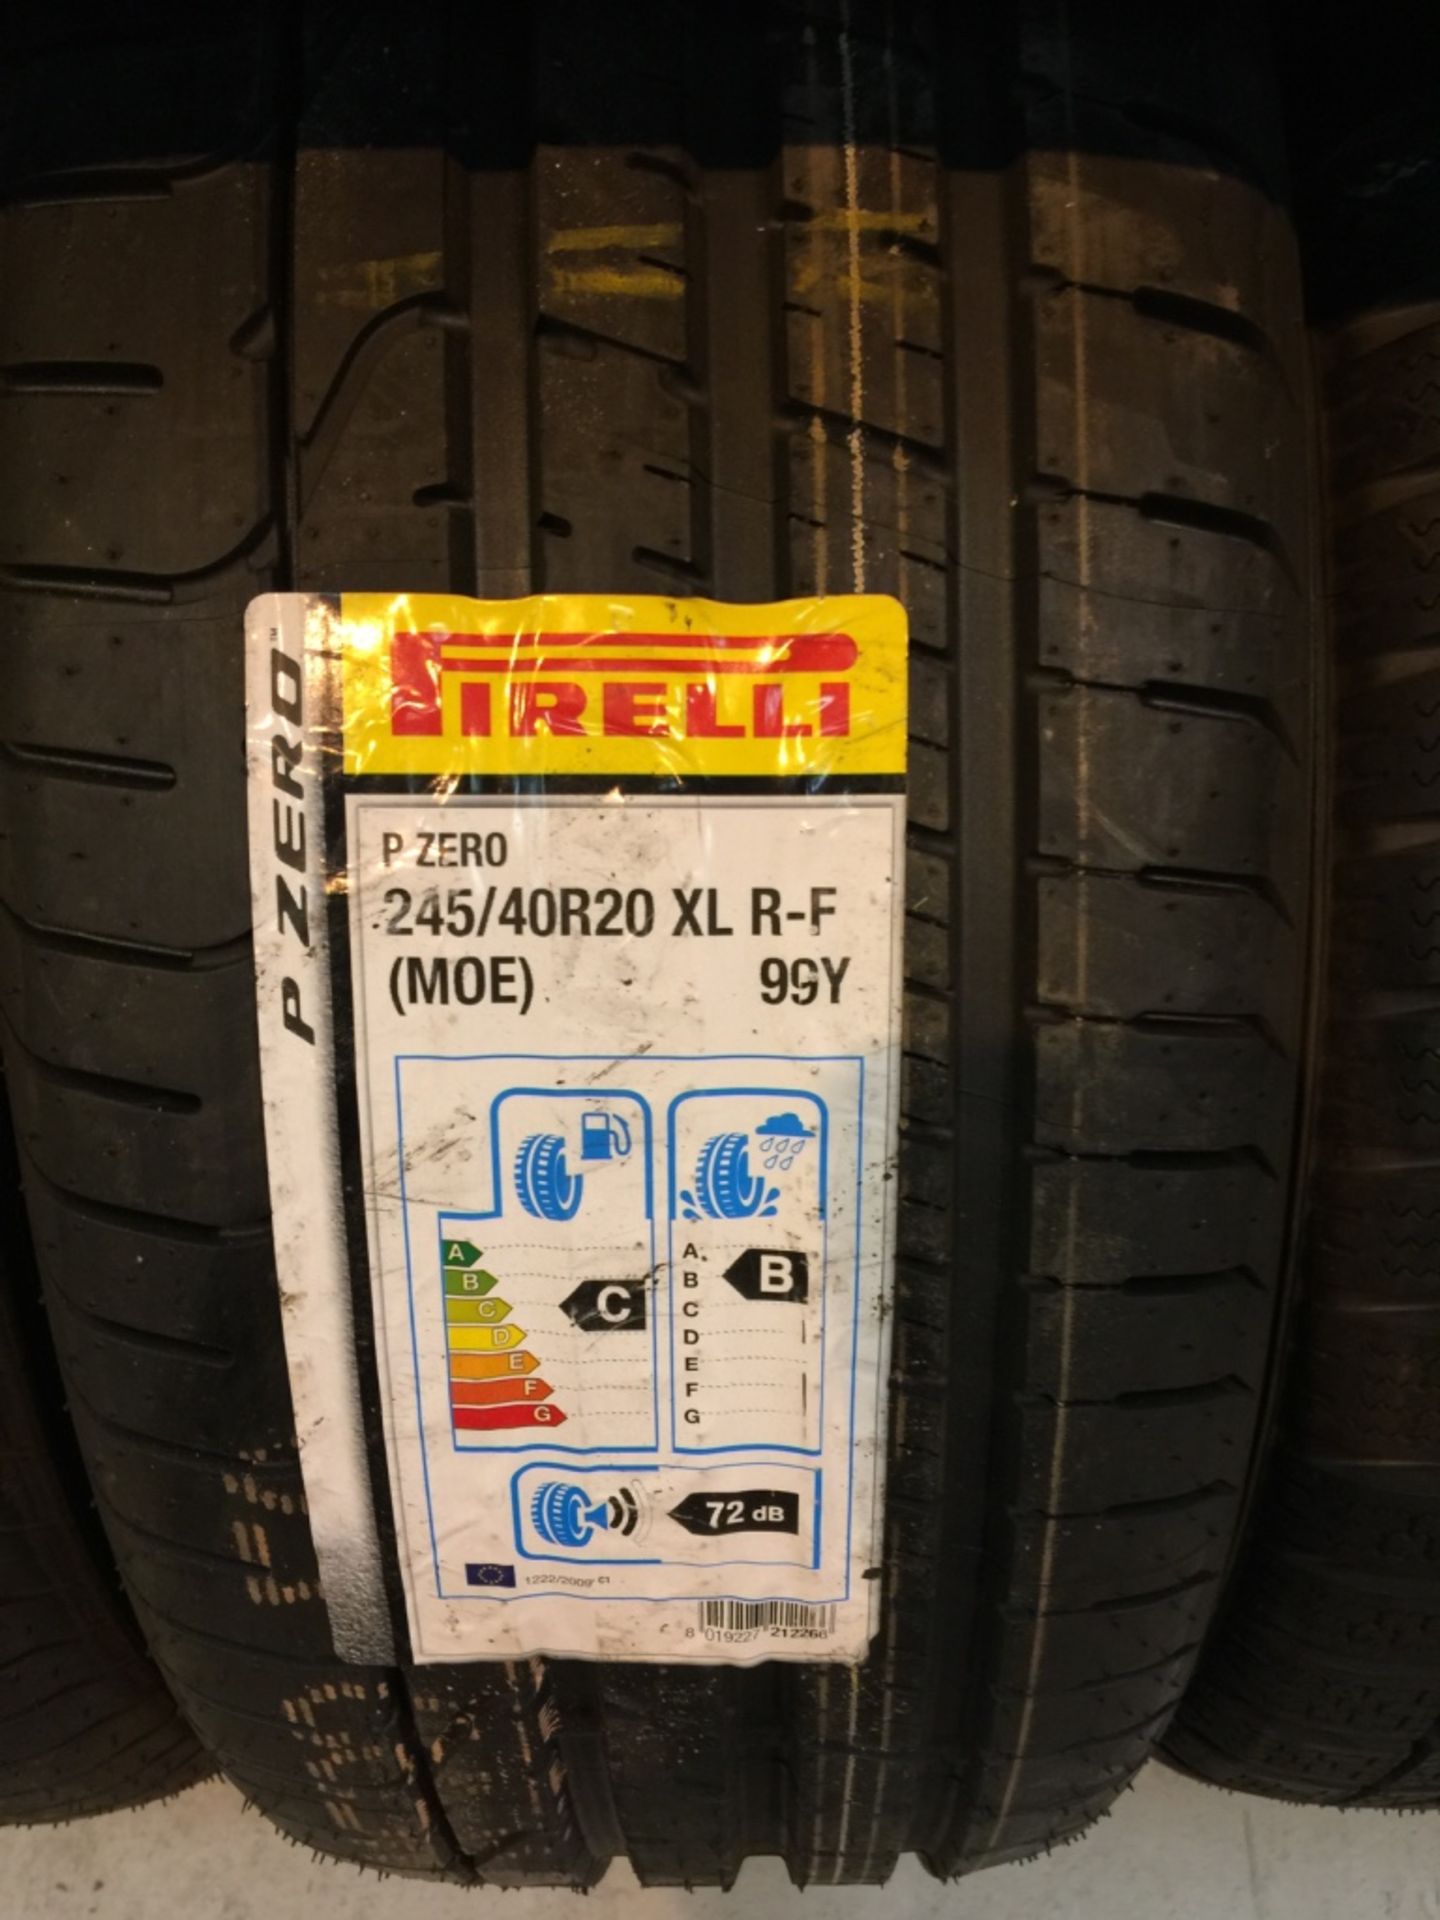 54: Pirelli Tyres Car & 4X4 - Many Large Sizes to include 18,19,21" Please see further Pictures ( - Image 38 of 55